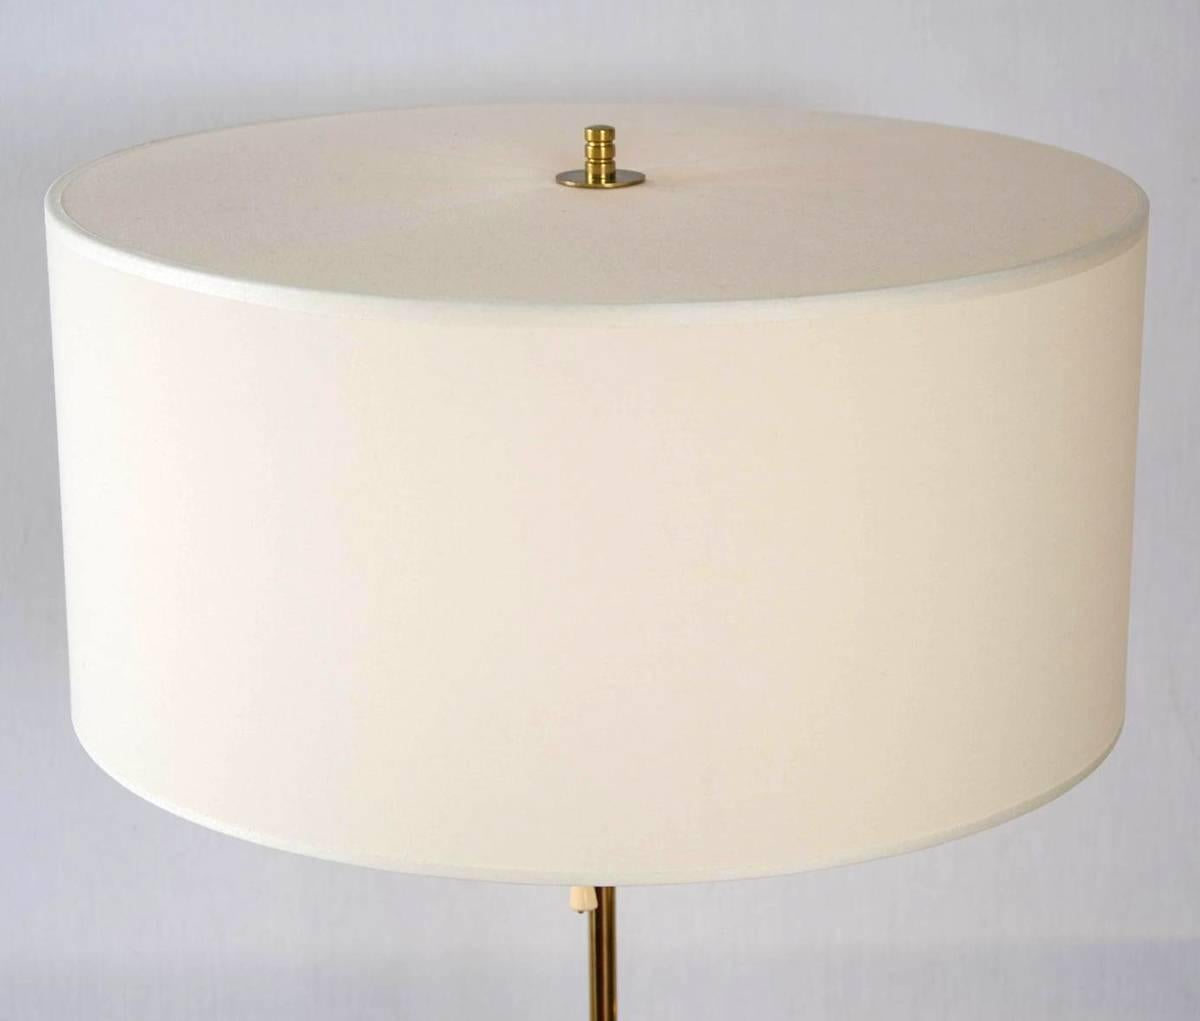 Brass table lamps with slim supports emanating form conical bases holding their original custom-made drum shades in off-white linen, stamped: 'Bergbom' on underside.